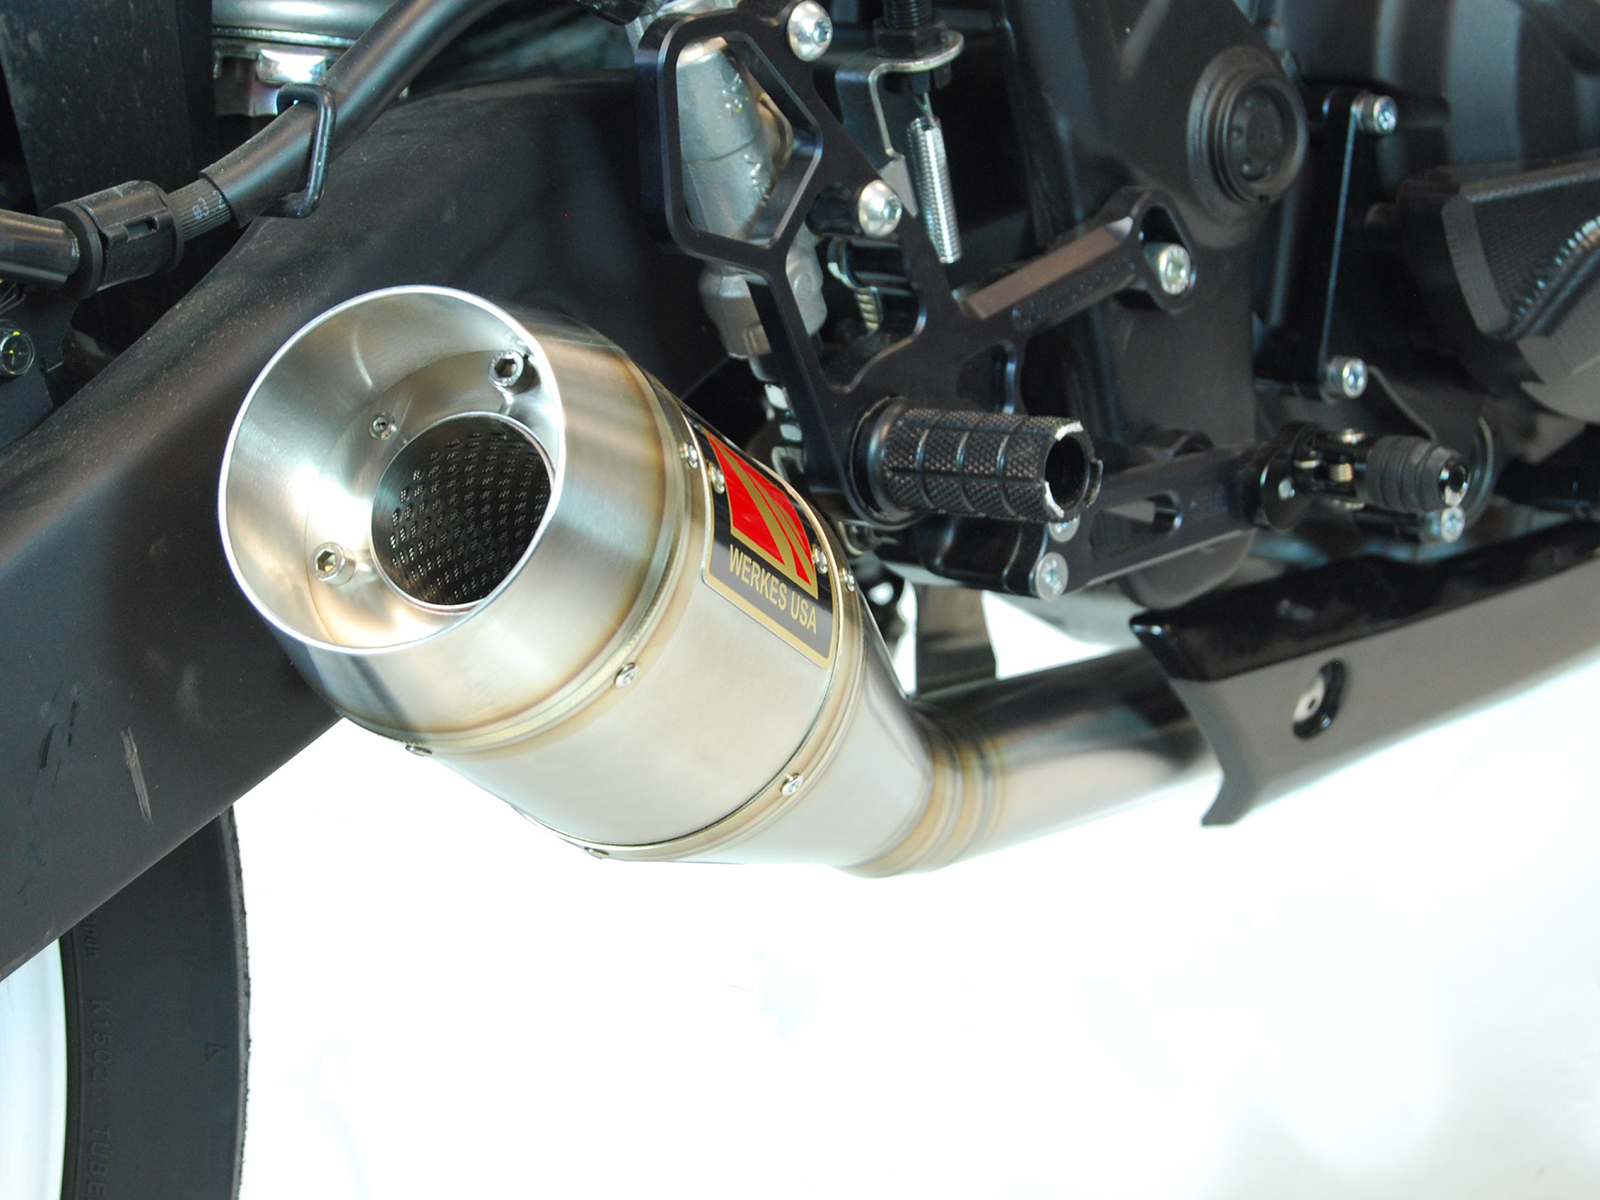 Stainless Steel Race Slip On Exhaust - For Yamaha R3 - Click Image to Close